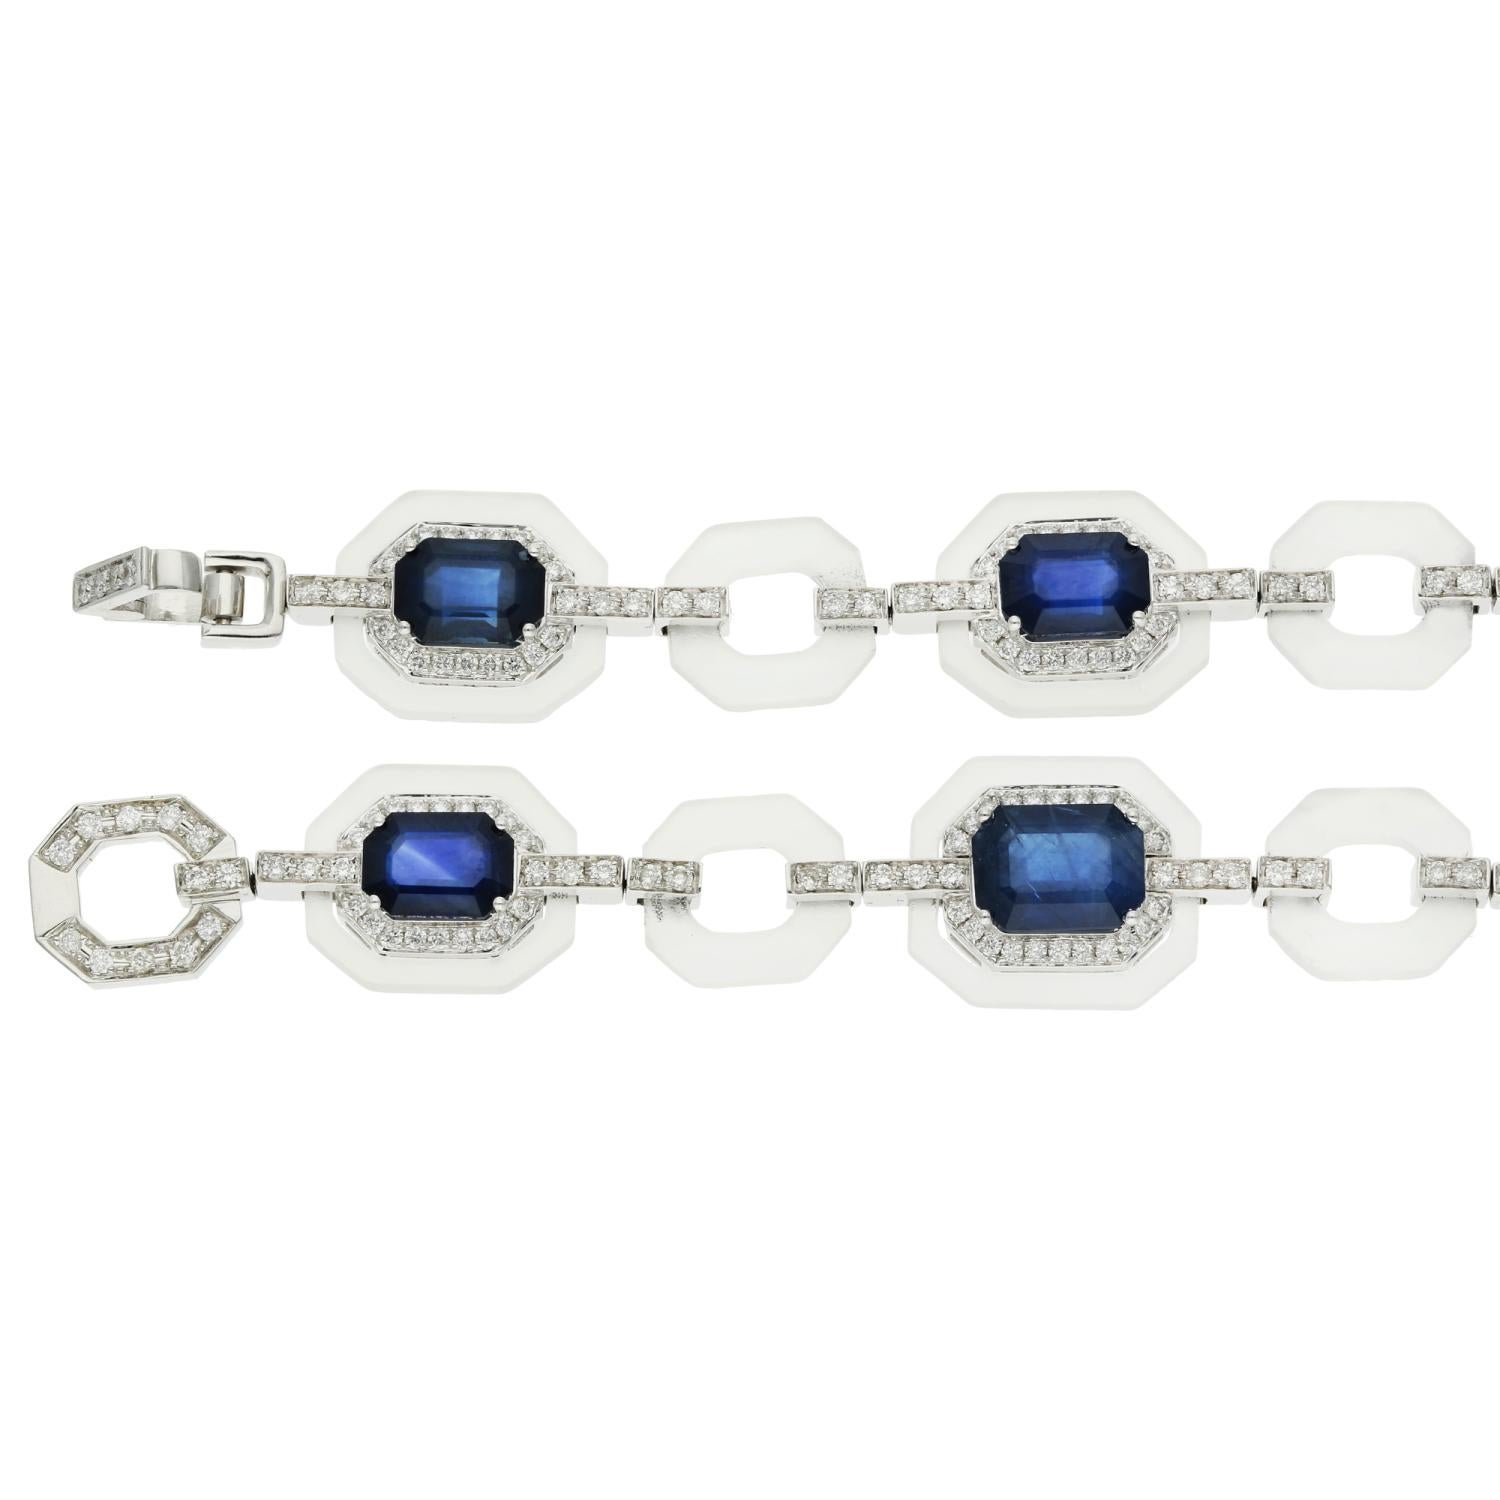 Fei Liu 18ct White Gold 10.40ct Sapphire, 1.10ct Diamond & Rock Crystal Bracelet

Indulge in the epitome of sophistication with our Pre-Owned Sapphire, Diamond & Rock Crystal Bracelet. This exquisite piece is a true testament to the fusion of